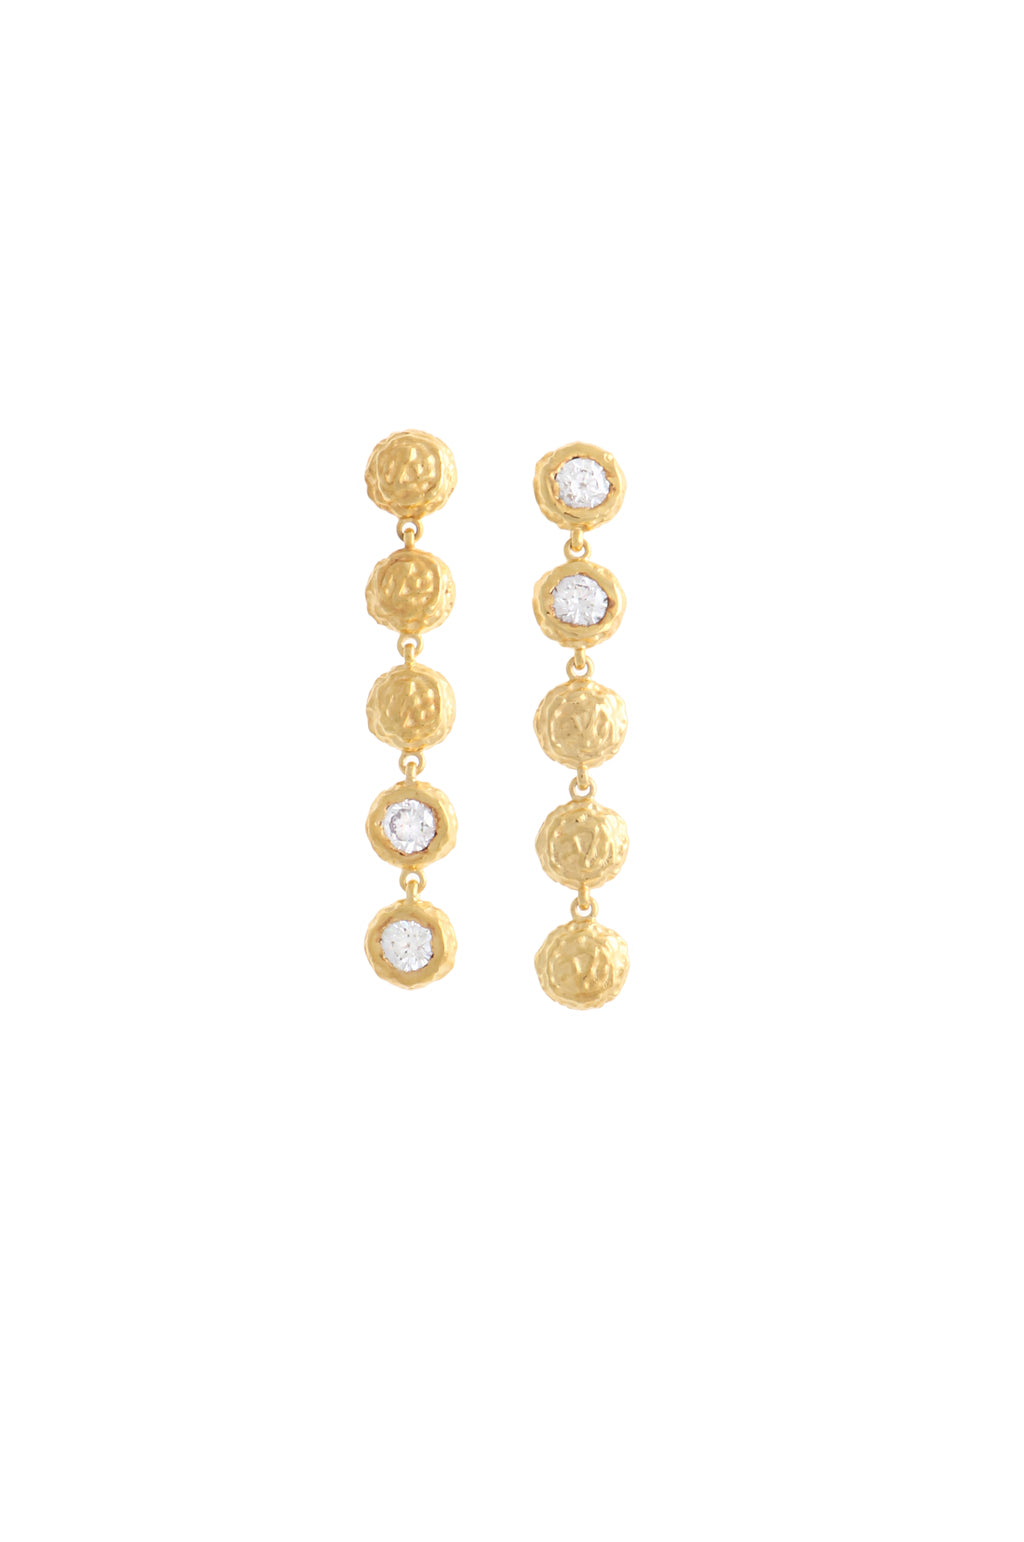 GOLD PLATED EYES EARRINGS WITH CUBIC ZIRCONIA